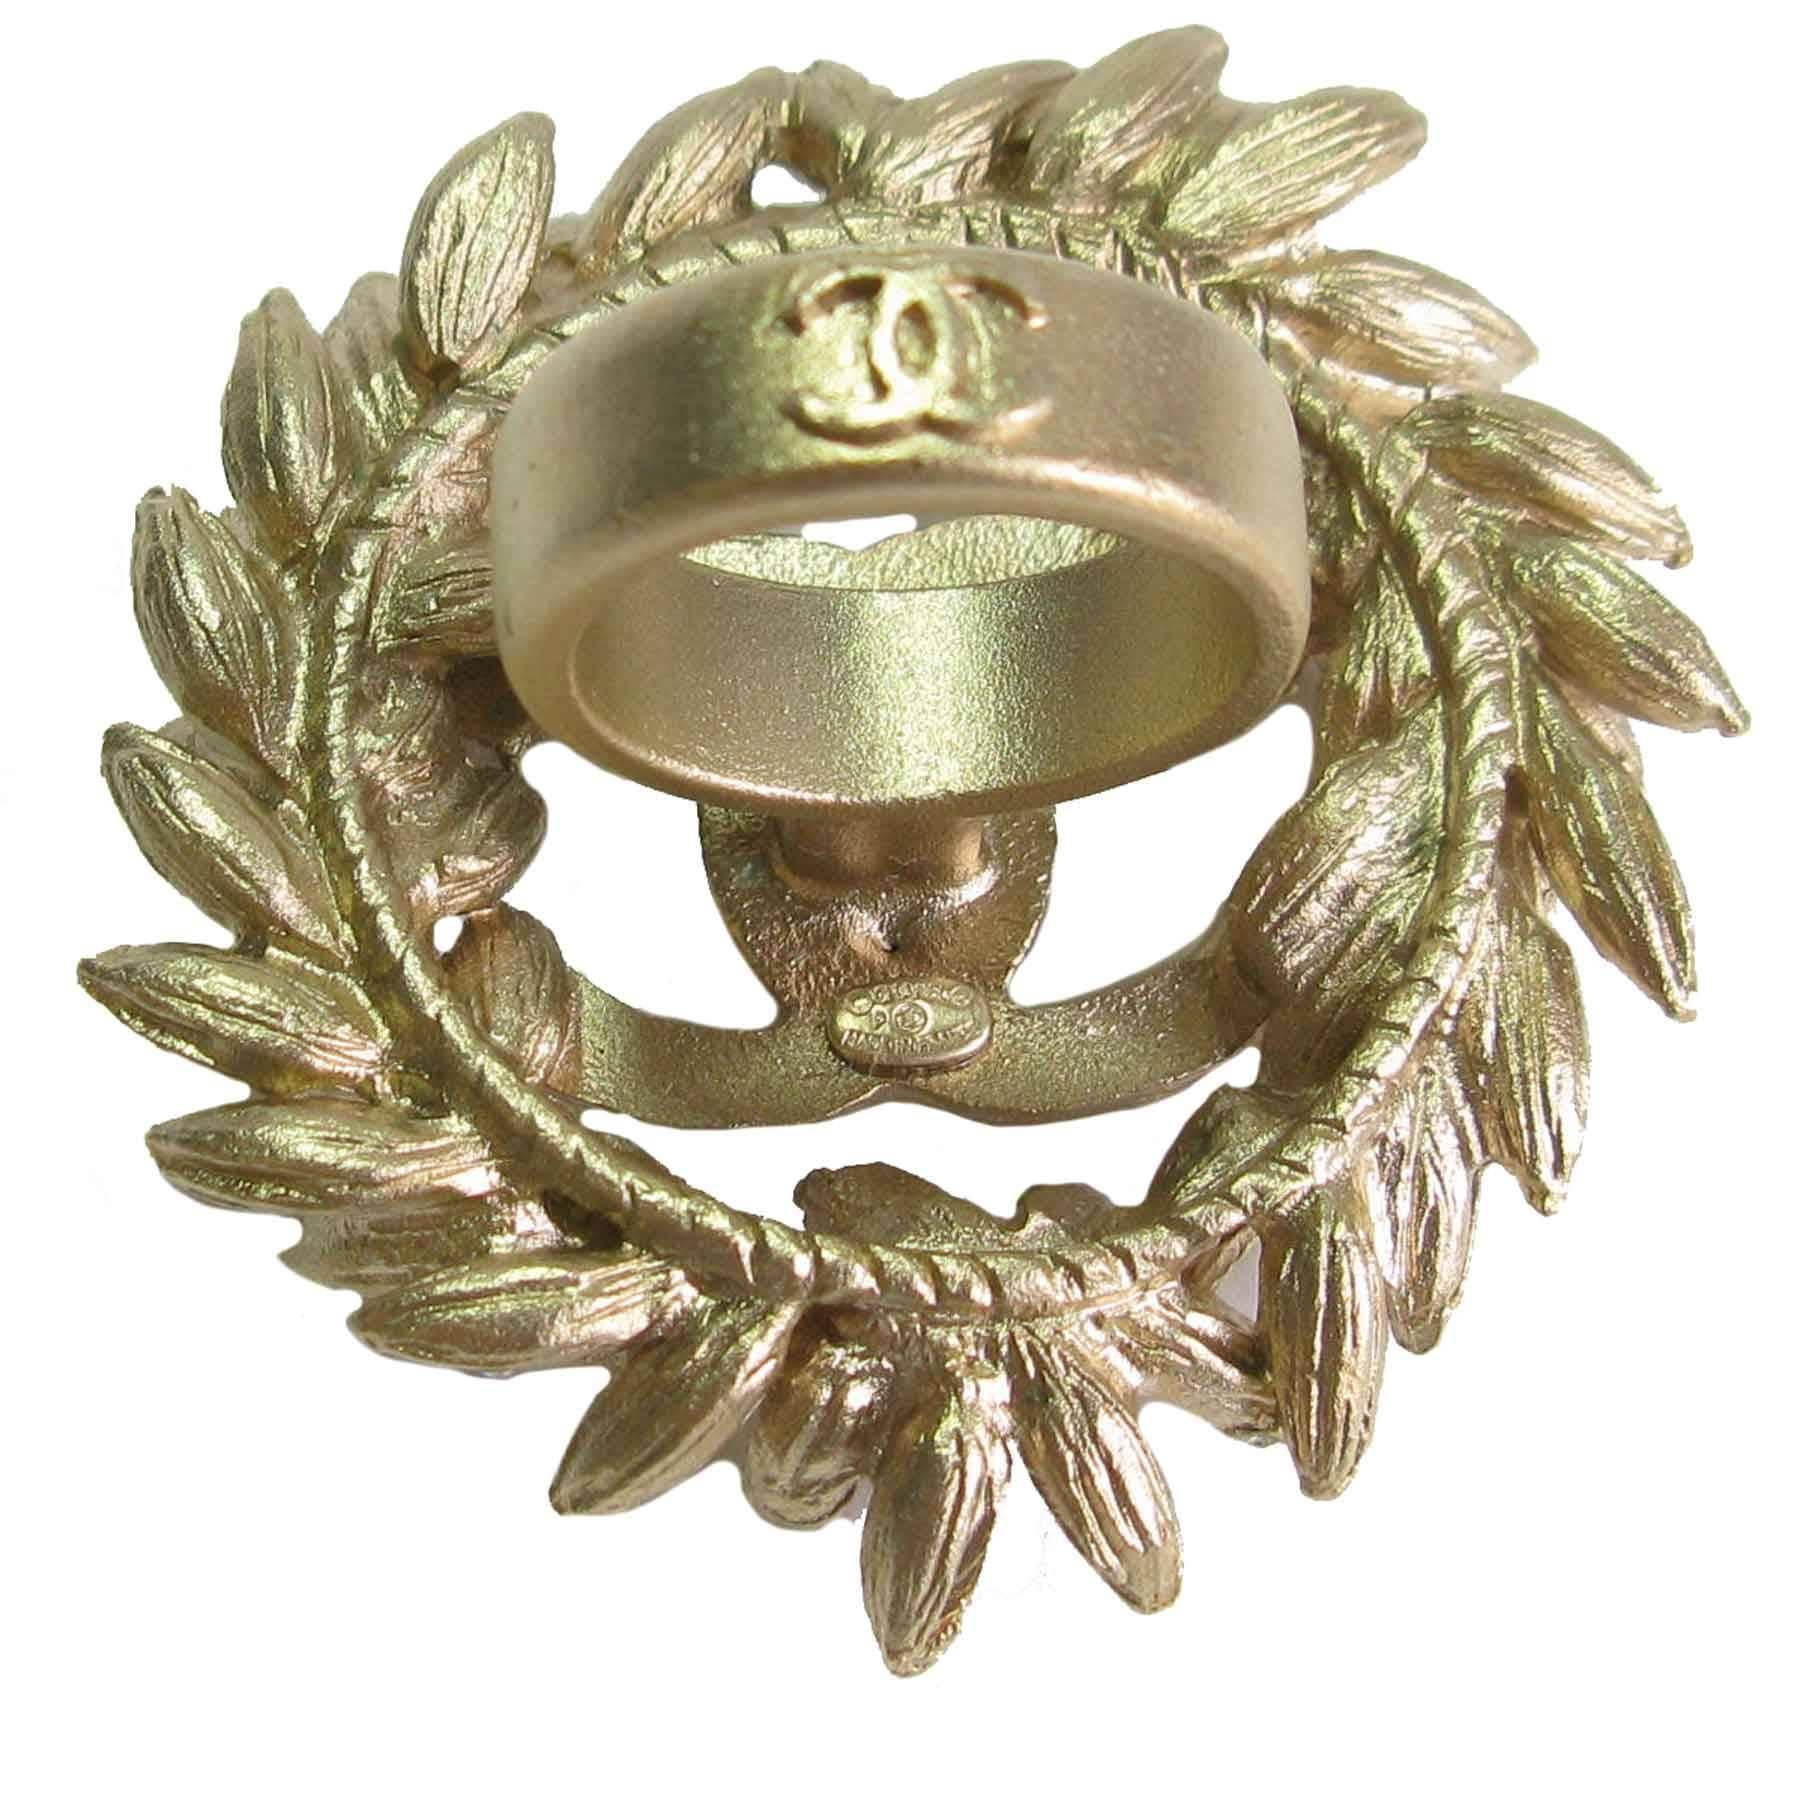 CHANEL Crown Ear of Wheat Ring in Gilded Metal Size 53FR 1